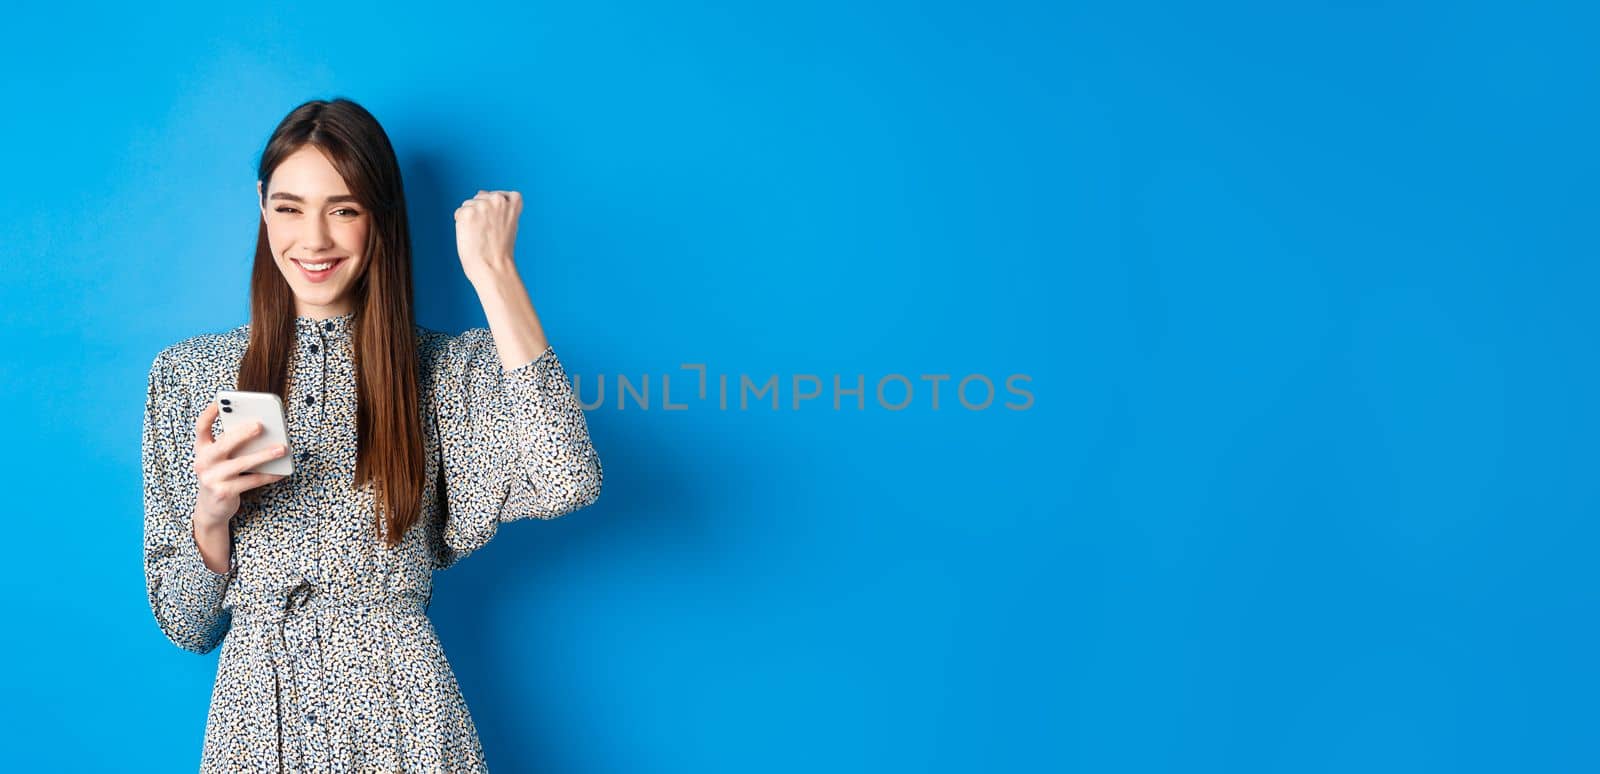 Happy pretty girl winning on mobile phone, smiling and chanting, holding smartphone, standing in dress against blue background.